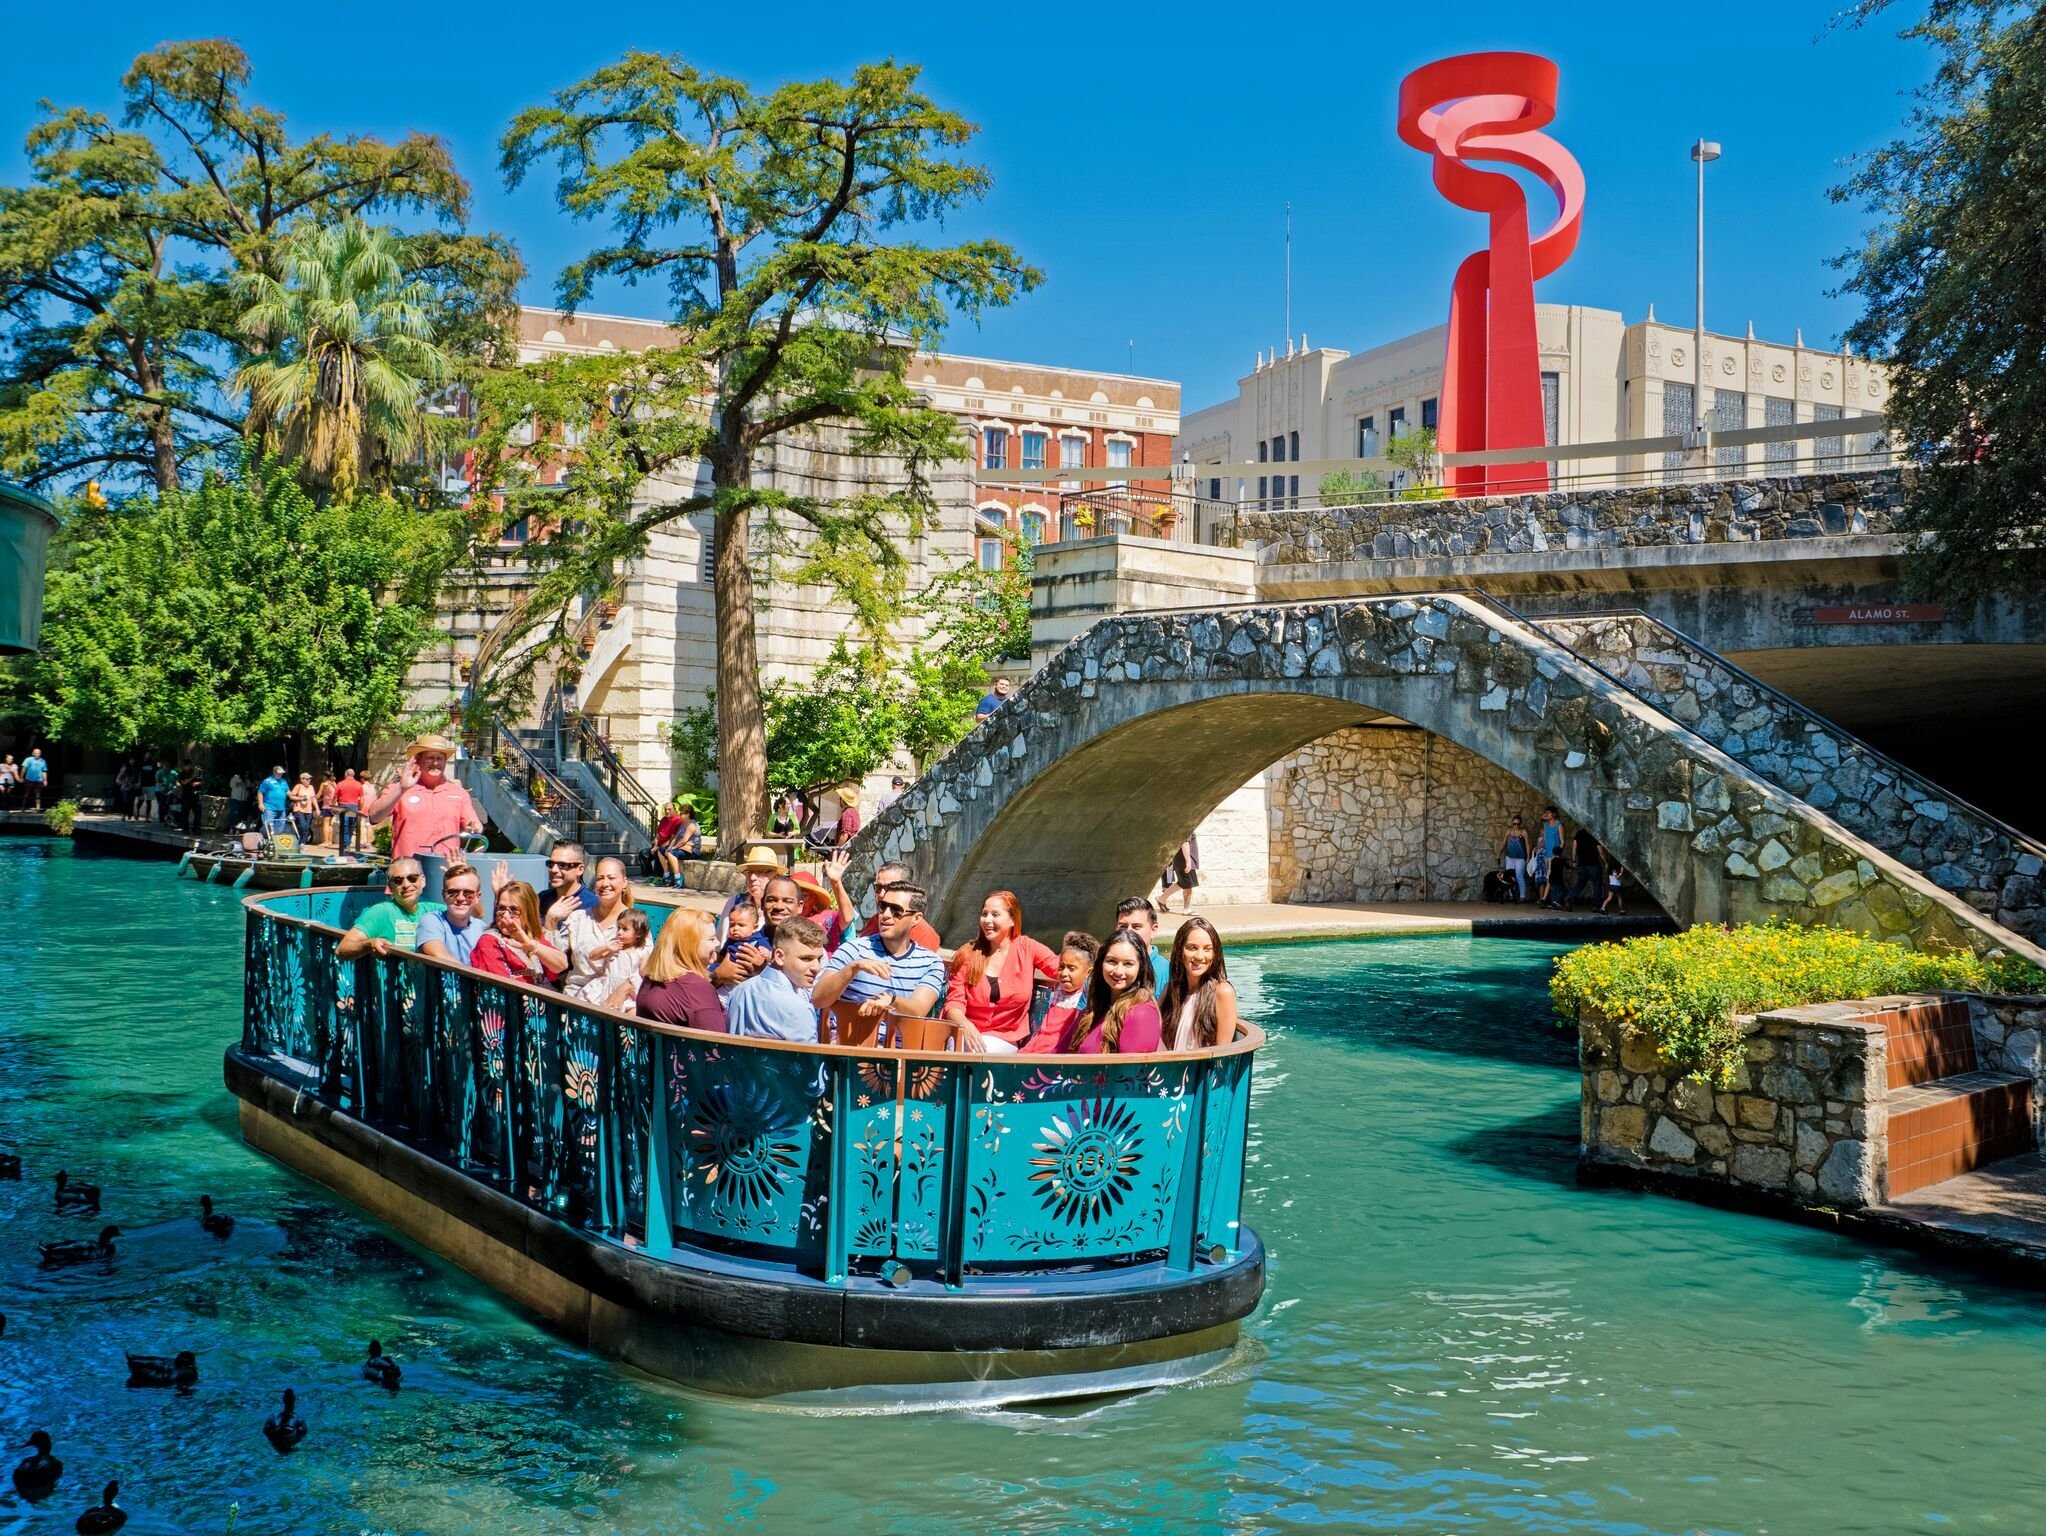 20 Best Things to Do in San Antonio for Tourists and Locals Alike